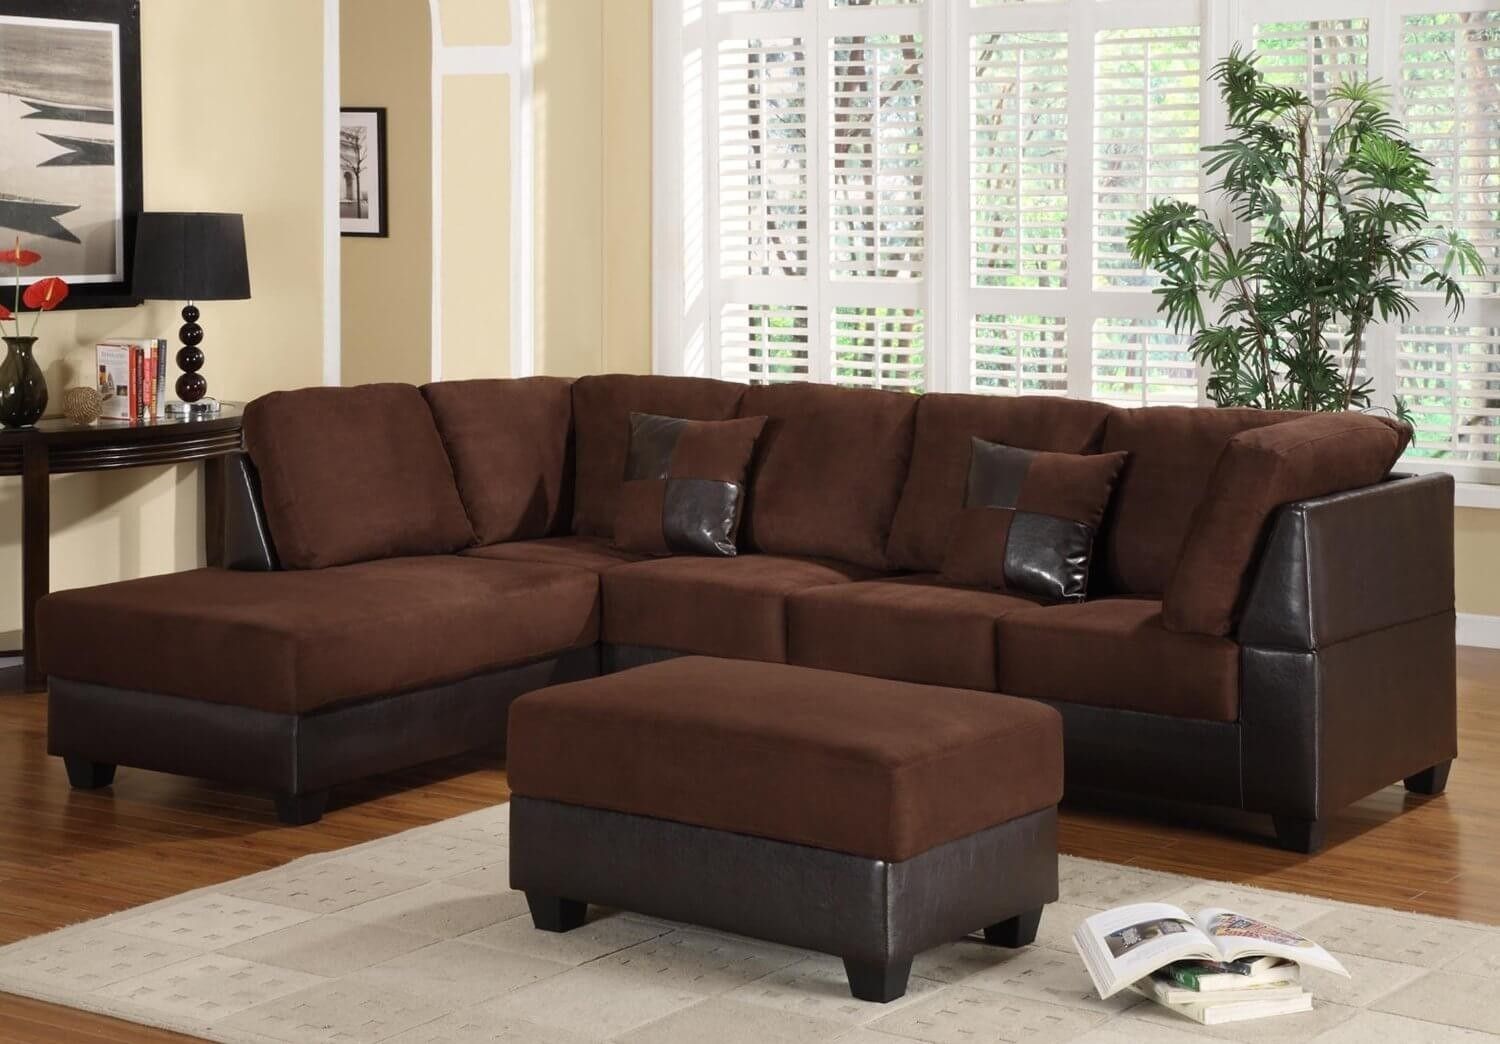 light leather sectional sofa under 500